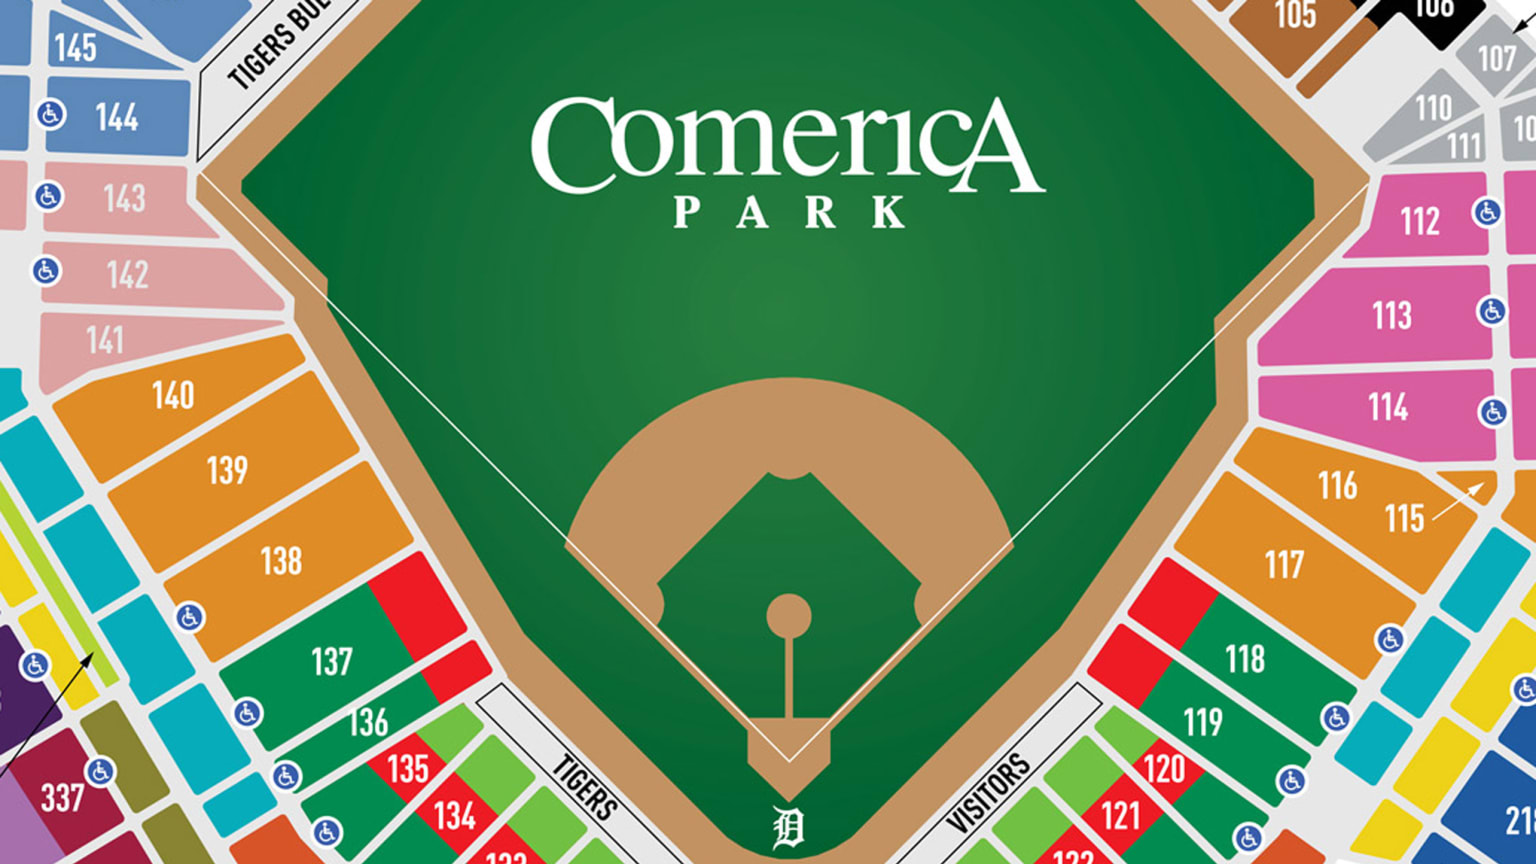 Comerica Park Seating Map With Seat Numbers Elcho Table